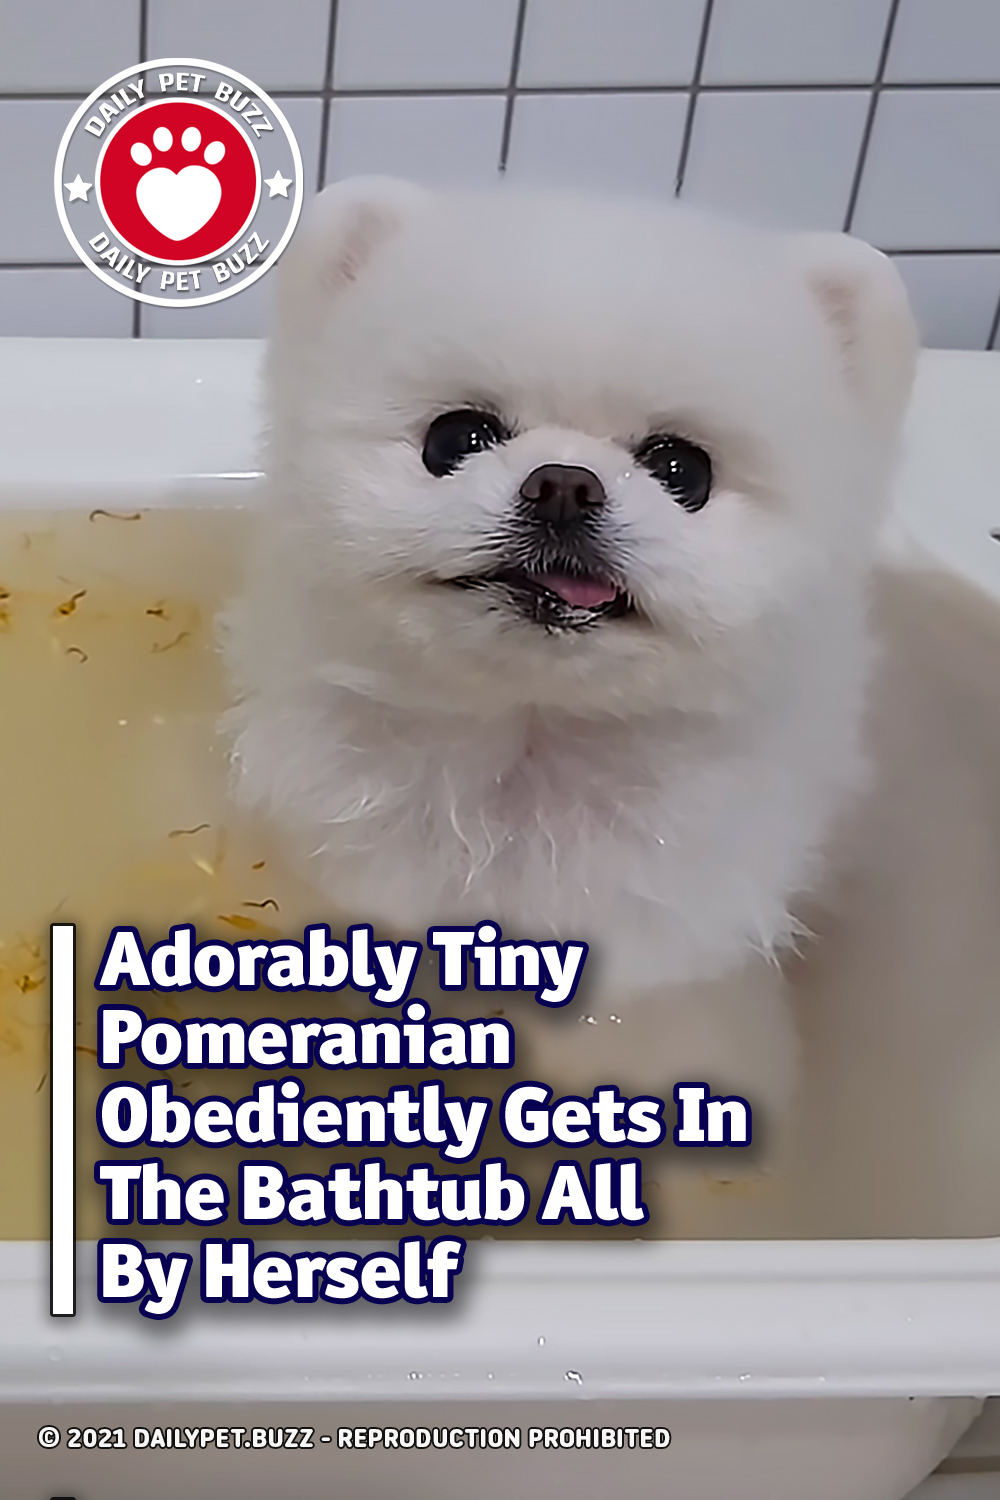 Adorably Tiny Pomeranian Obediently Gets In The Bathtub All By Herself